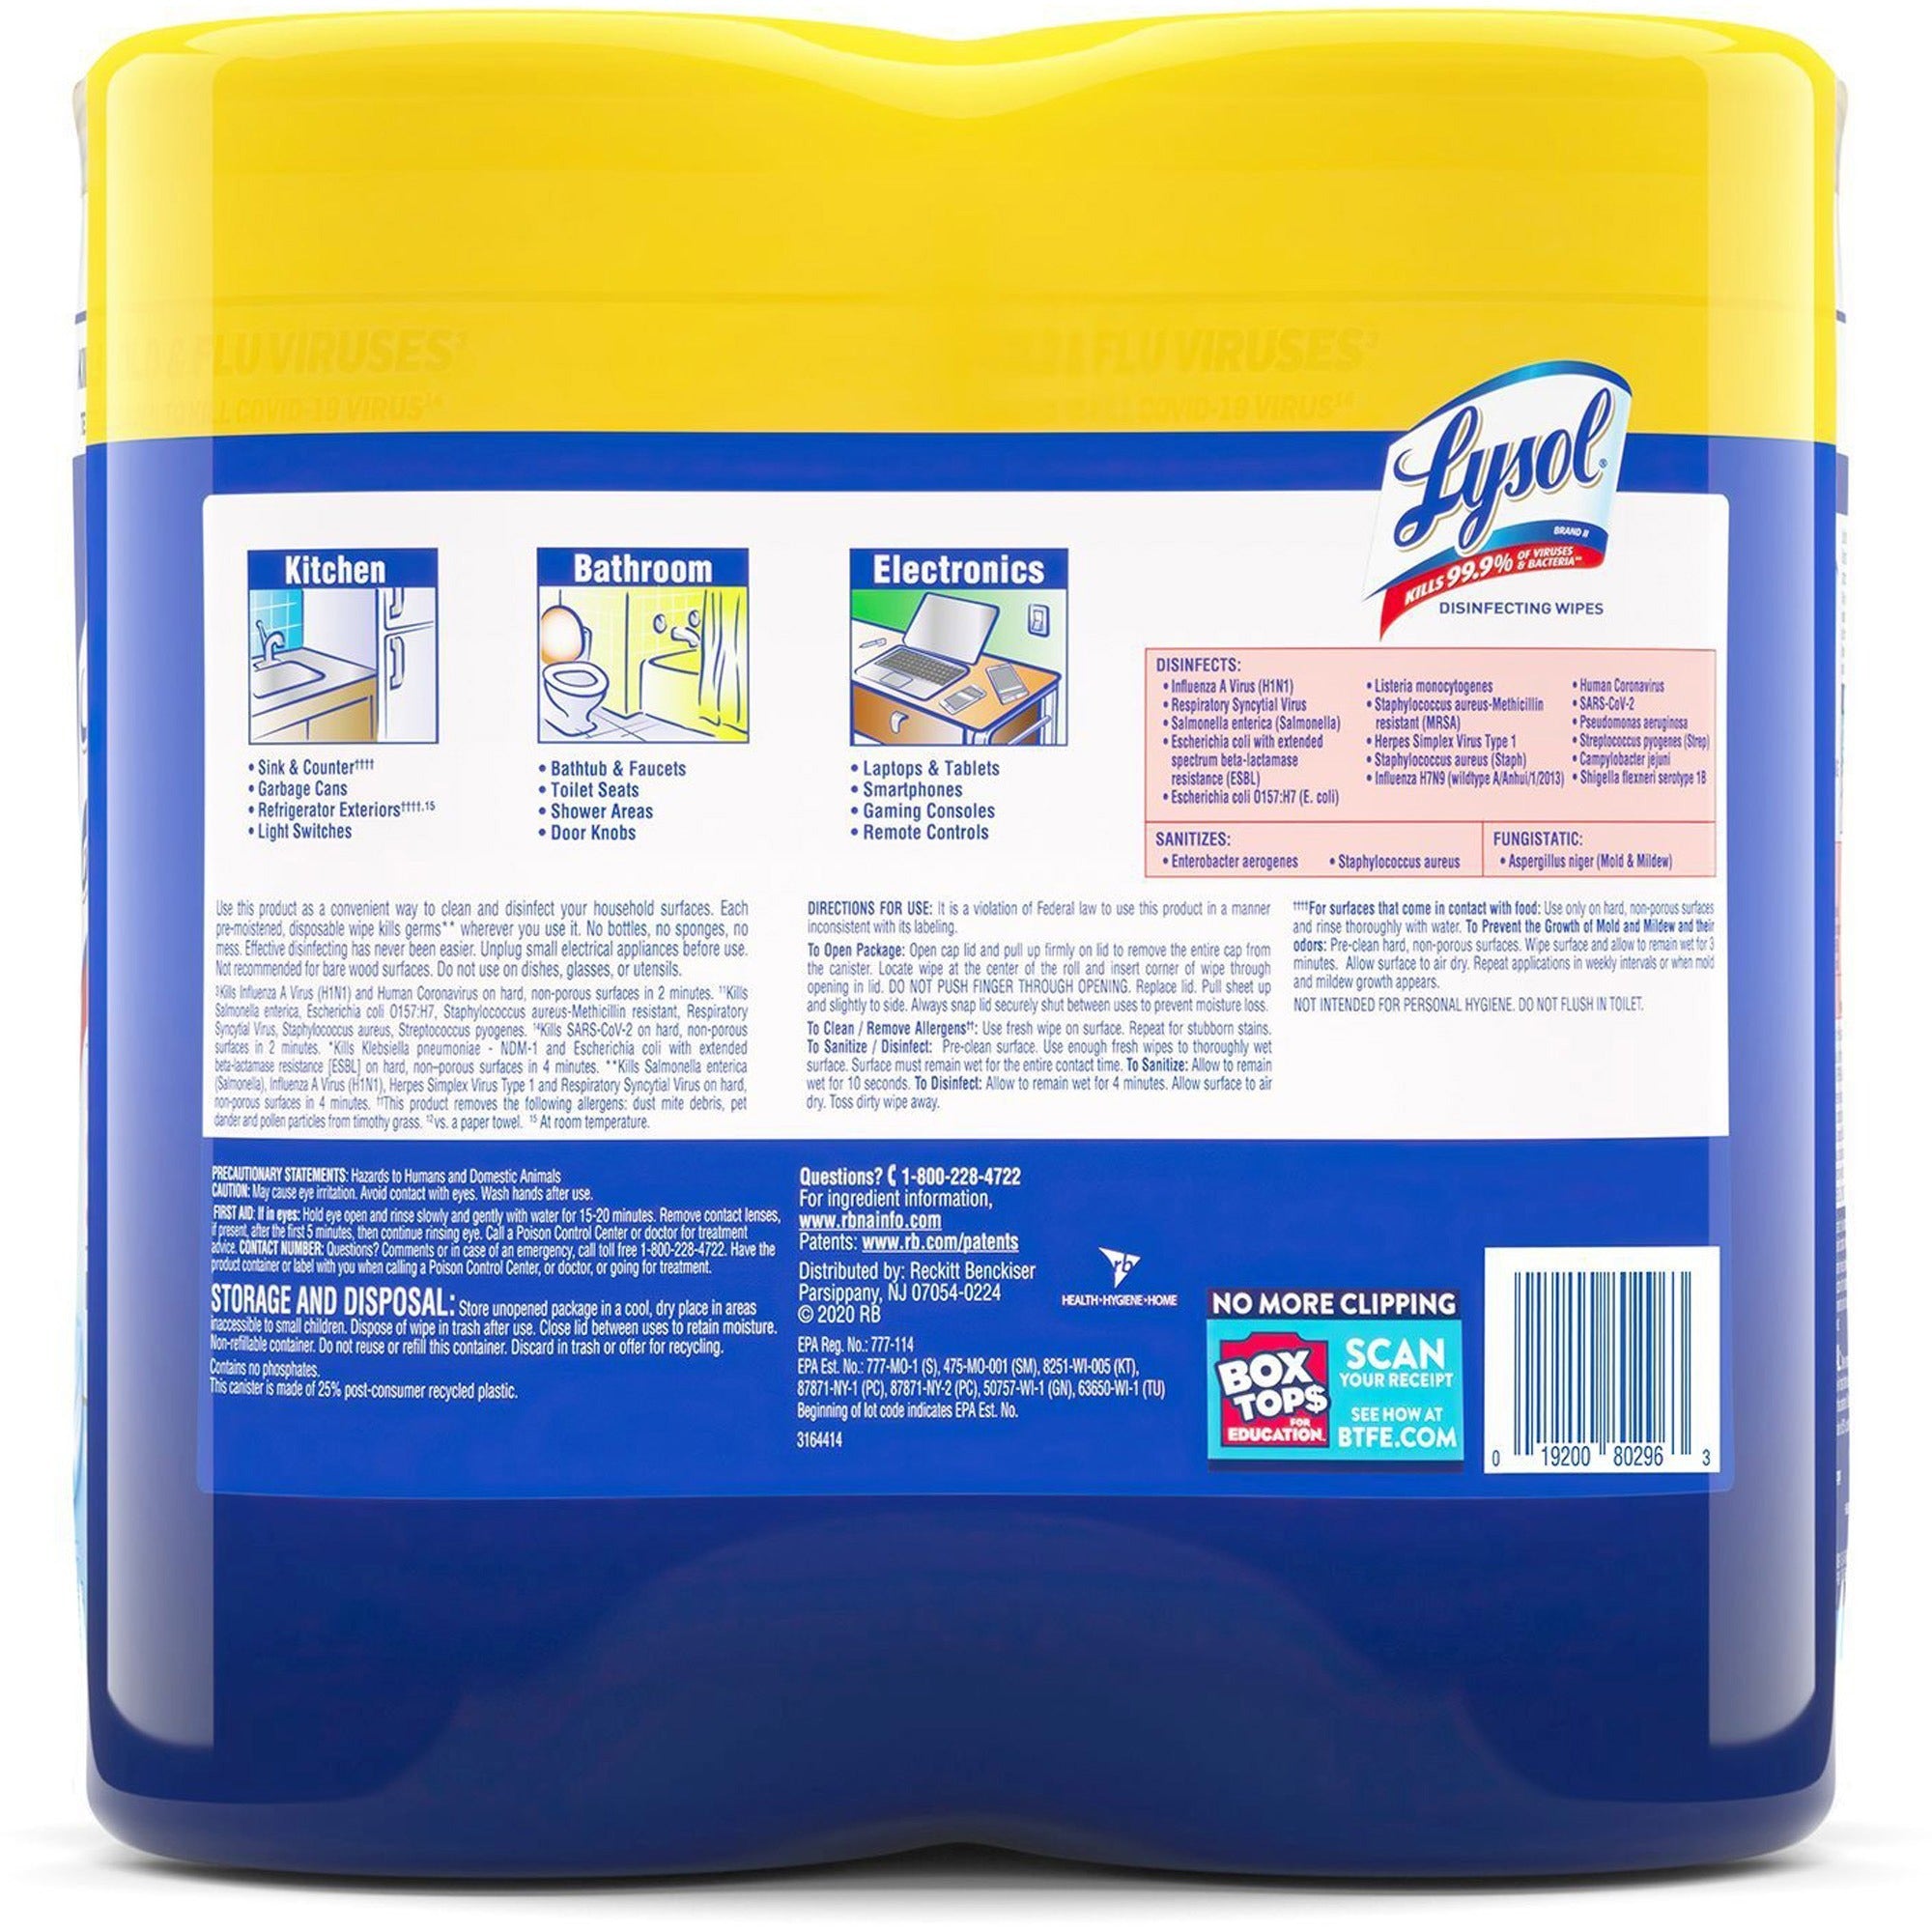 lysol-disinfecting-wipes-lemon-lime-scent-80-canister-6-carton-pre-moistened-disinfectant-antibacterial-white_rac80296ct - 3